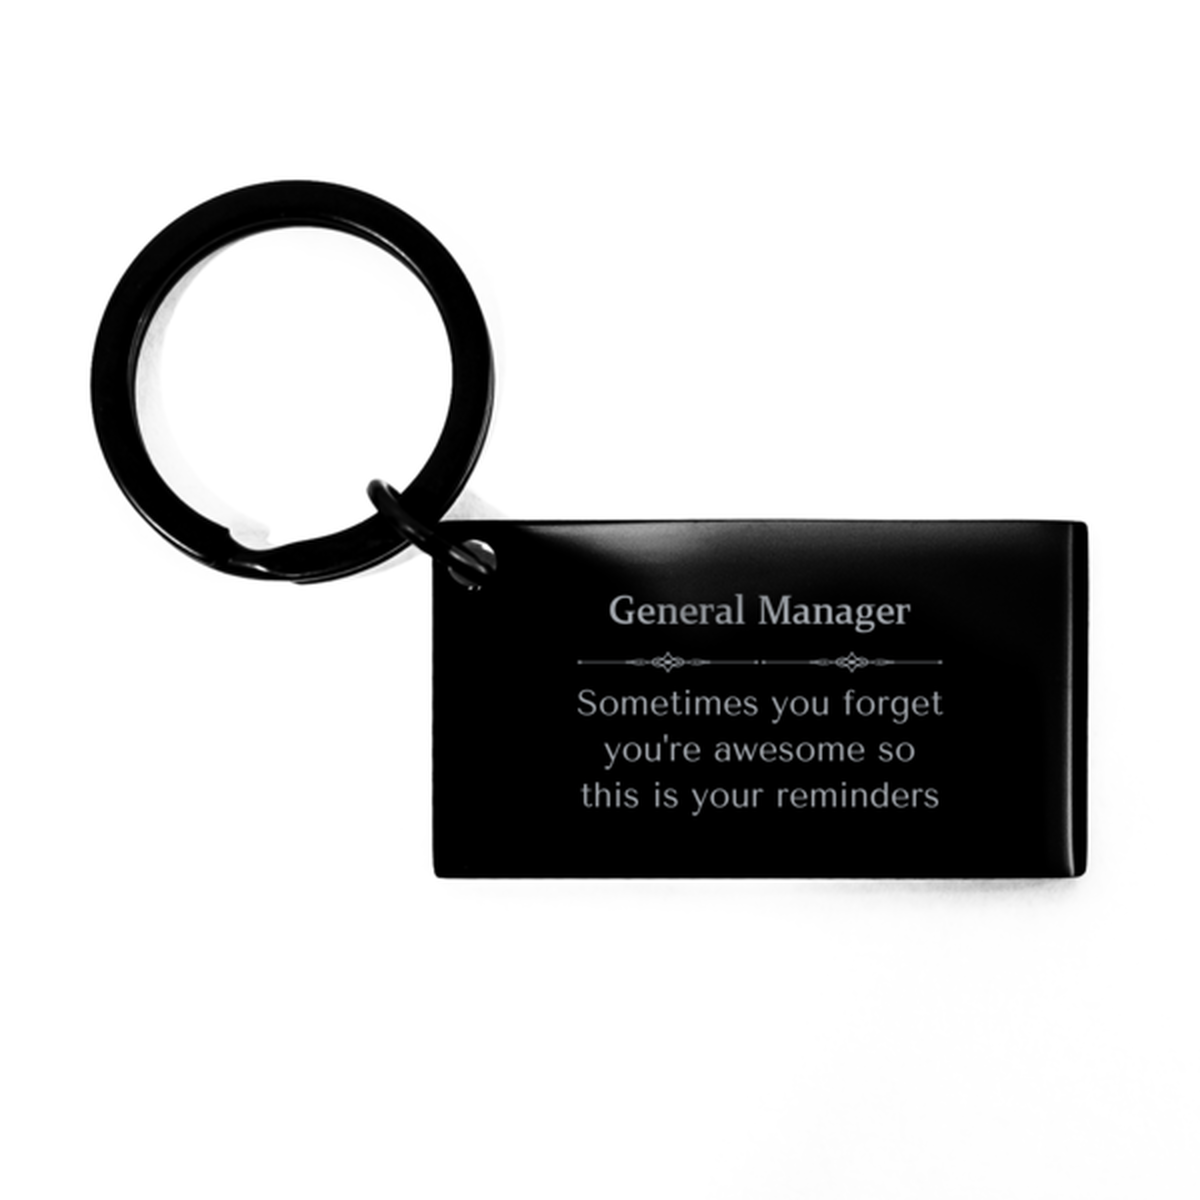 Sentimental General Manager Keychain, Maintenance Worker Sometimes you forget you're awesome so this is your reminders, Graduation Christmas Birthday Gifts for General Manager, Men, Women, Coworkers